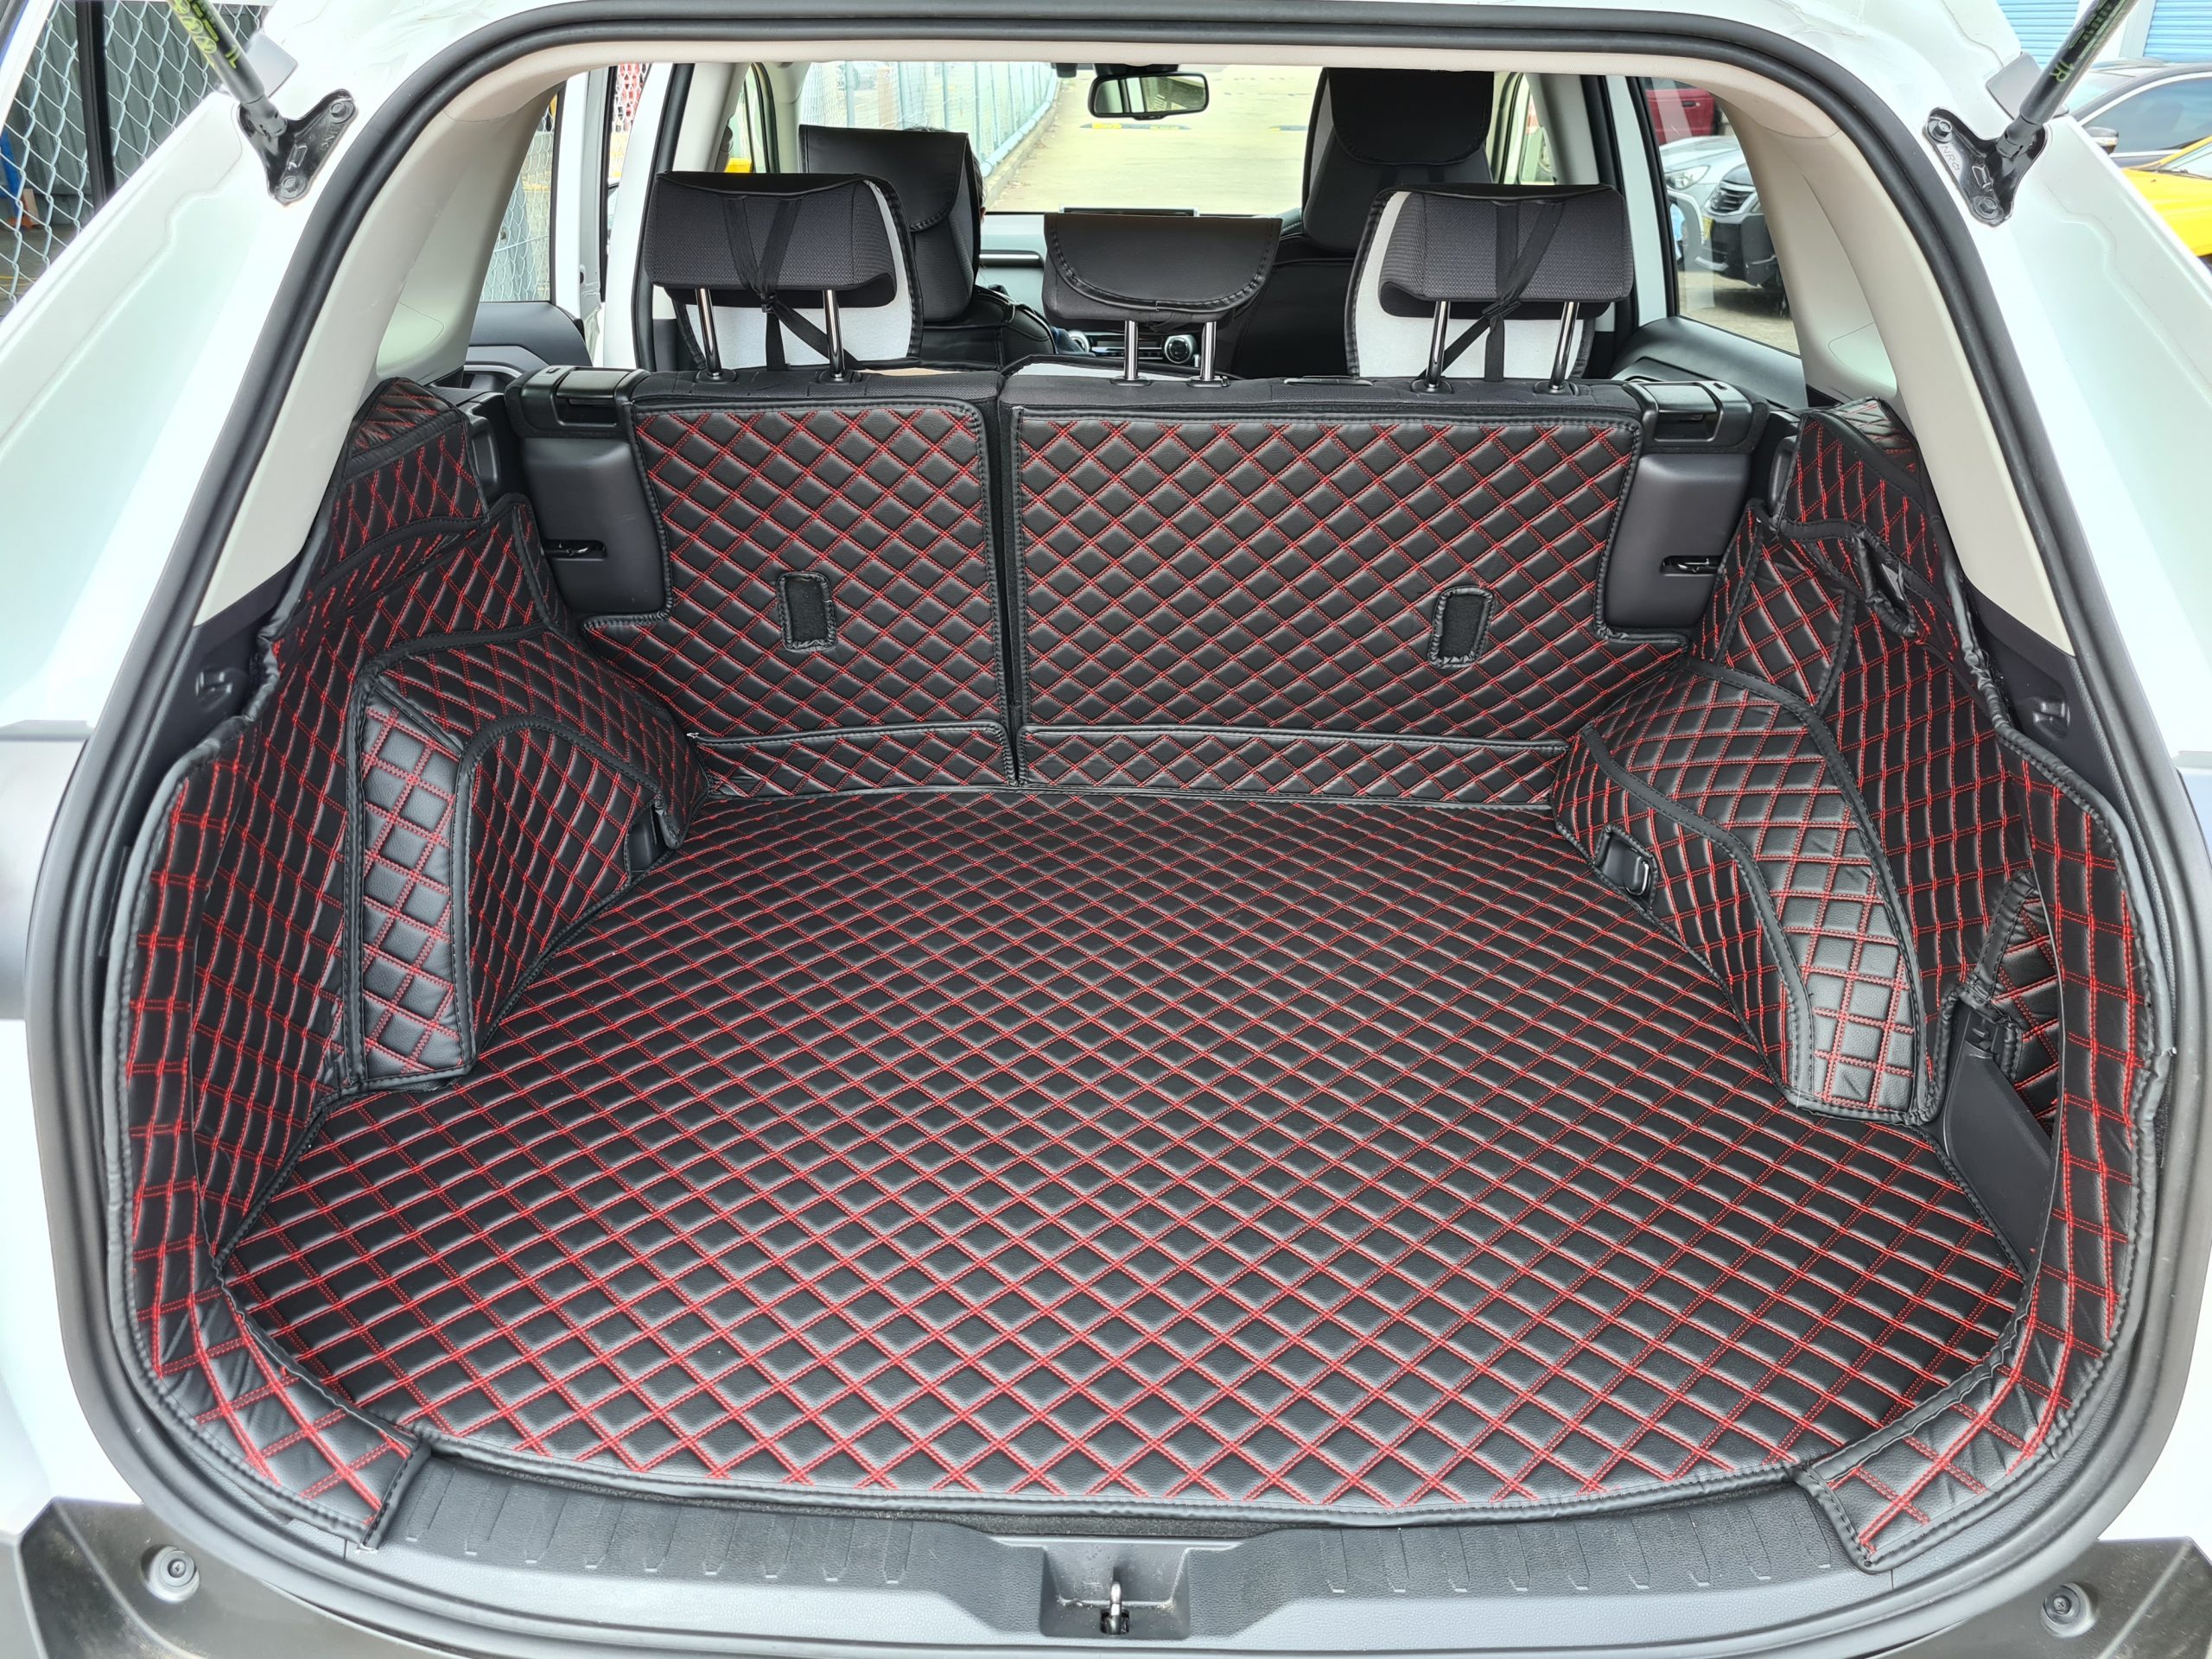 Mixsuper Anti-Slip Cargo Liner for KIA Sorento 7 Seat 2016-2020（Not Fit for 5 Passenger TPE All Weather Rear Durable Odorless 3D Trunk Floor Mat 